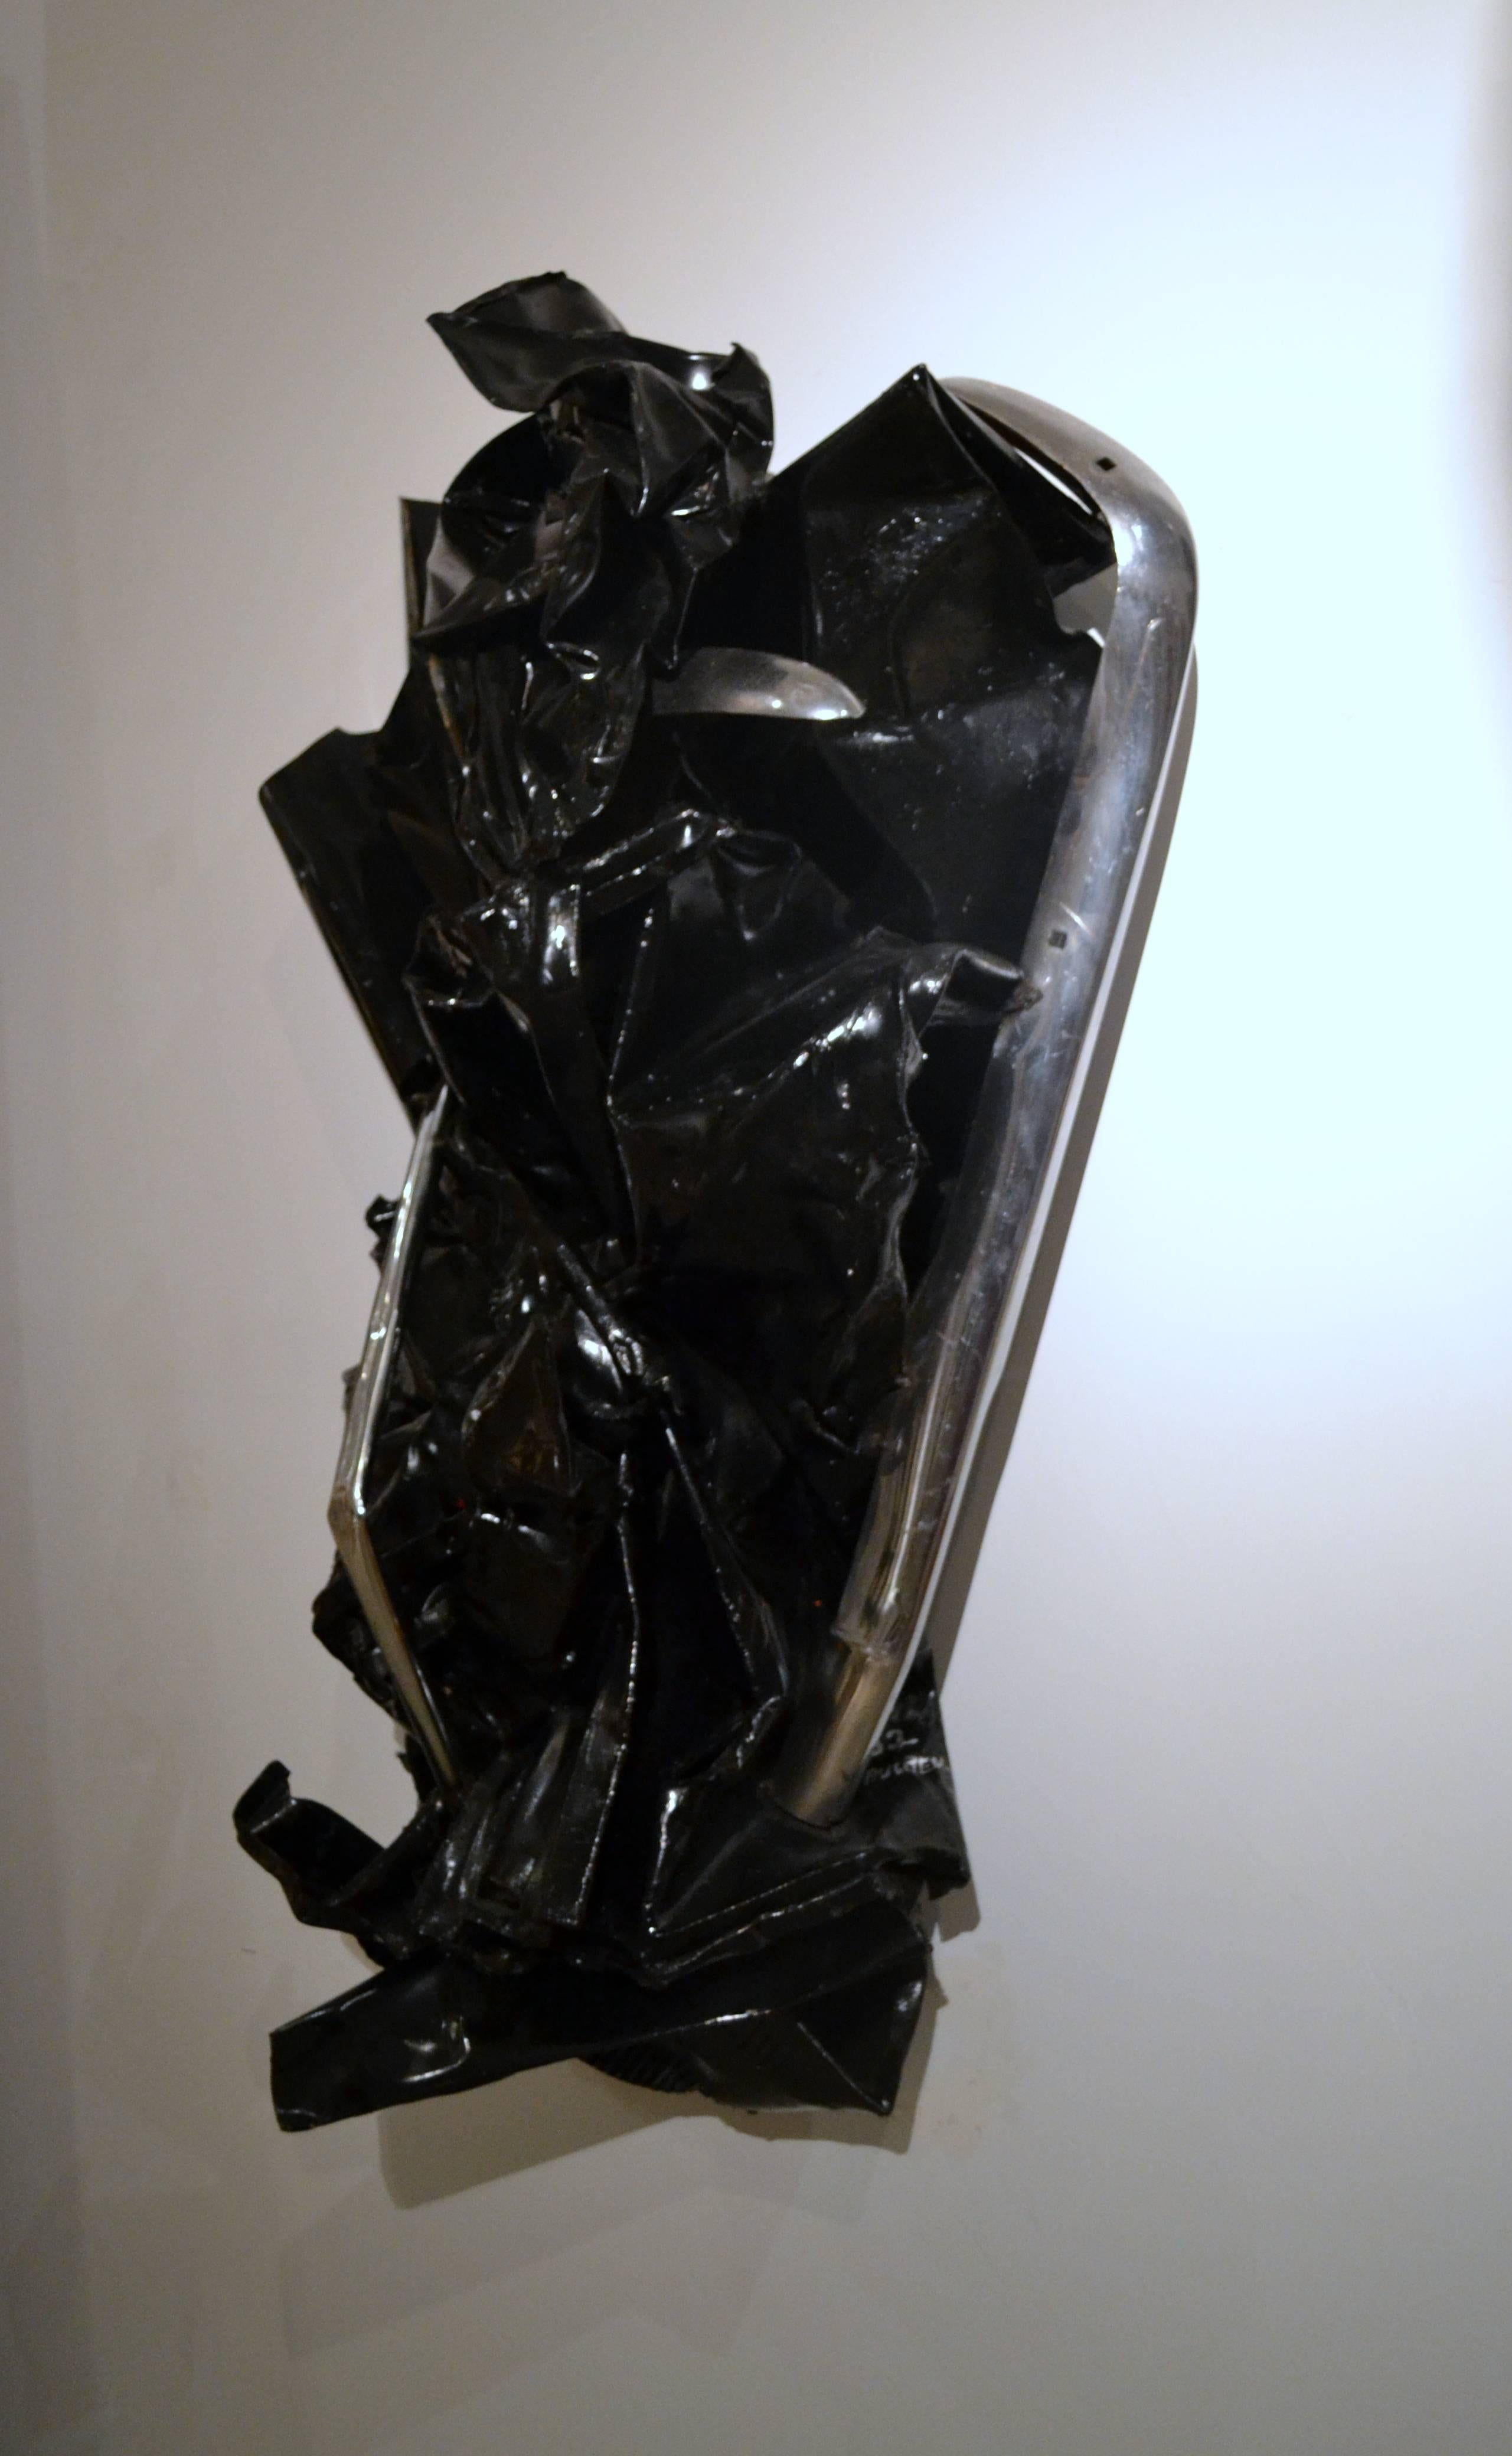 This abstract black steel and chrome sculpture by listed artist Paulden Evans (b. 1939) is aptly titled 